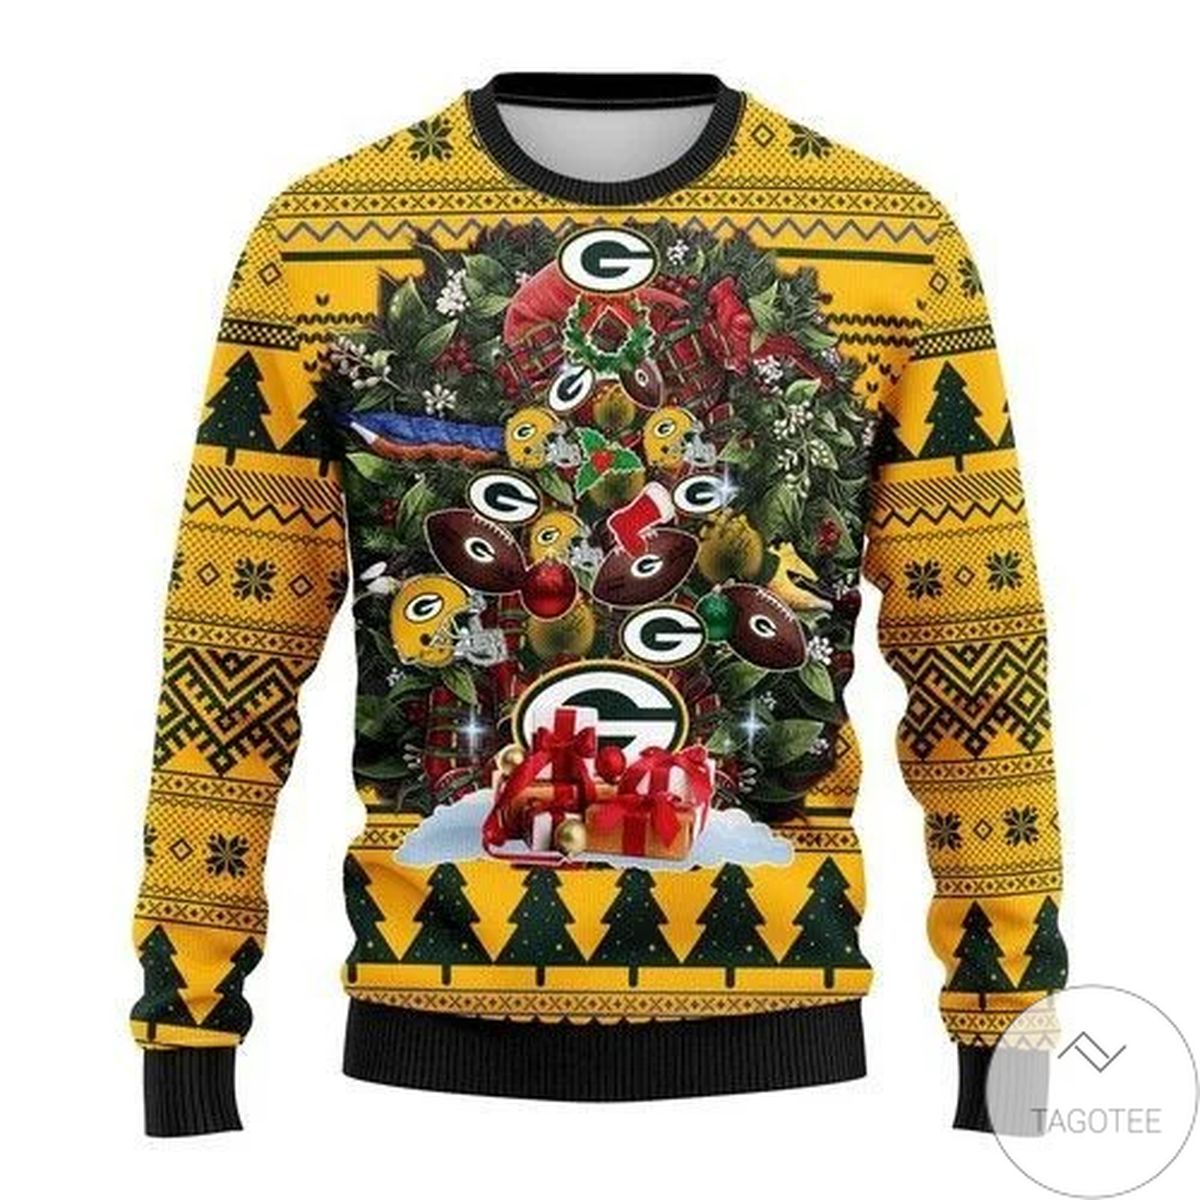 Nfl Green Bay Packers Tree Christmas Ugly Christmas Sweater